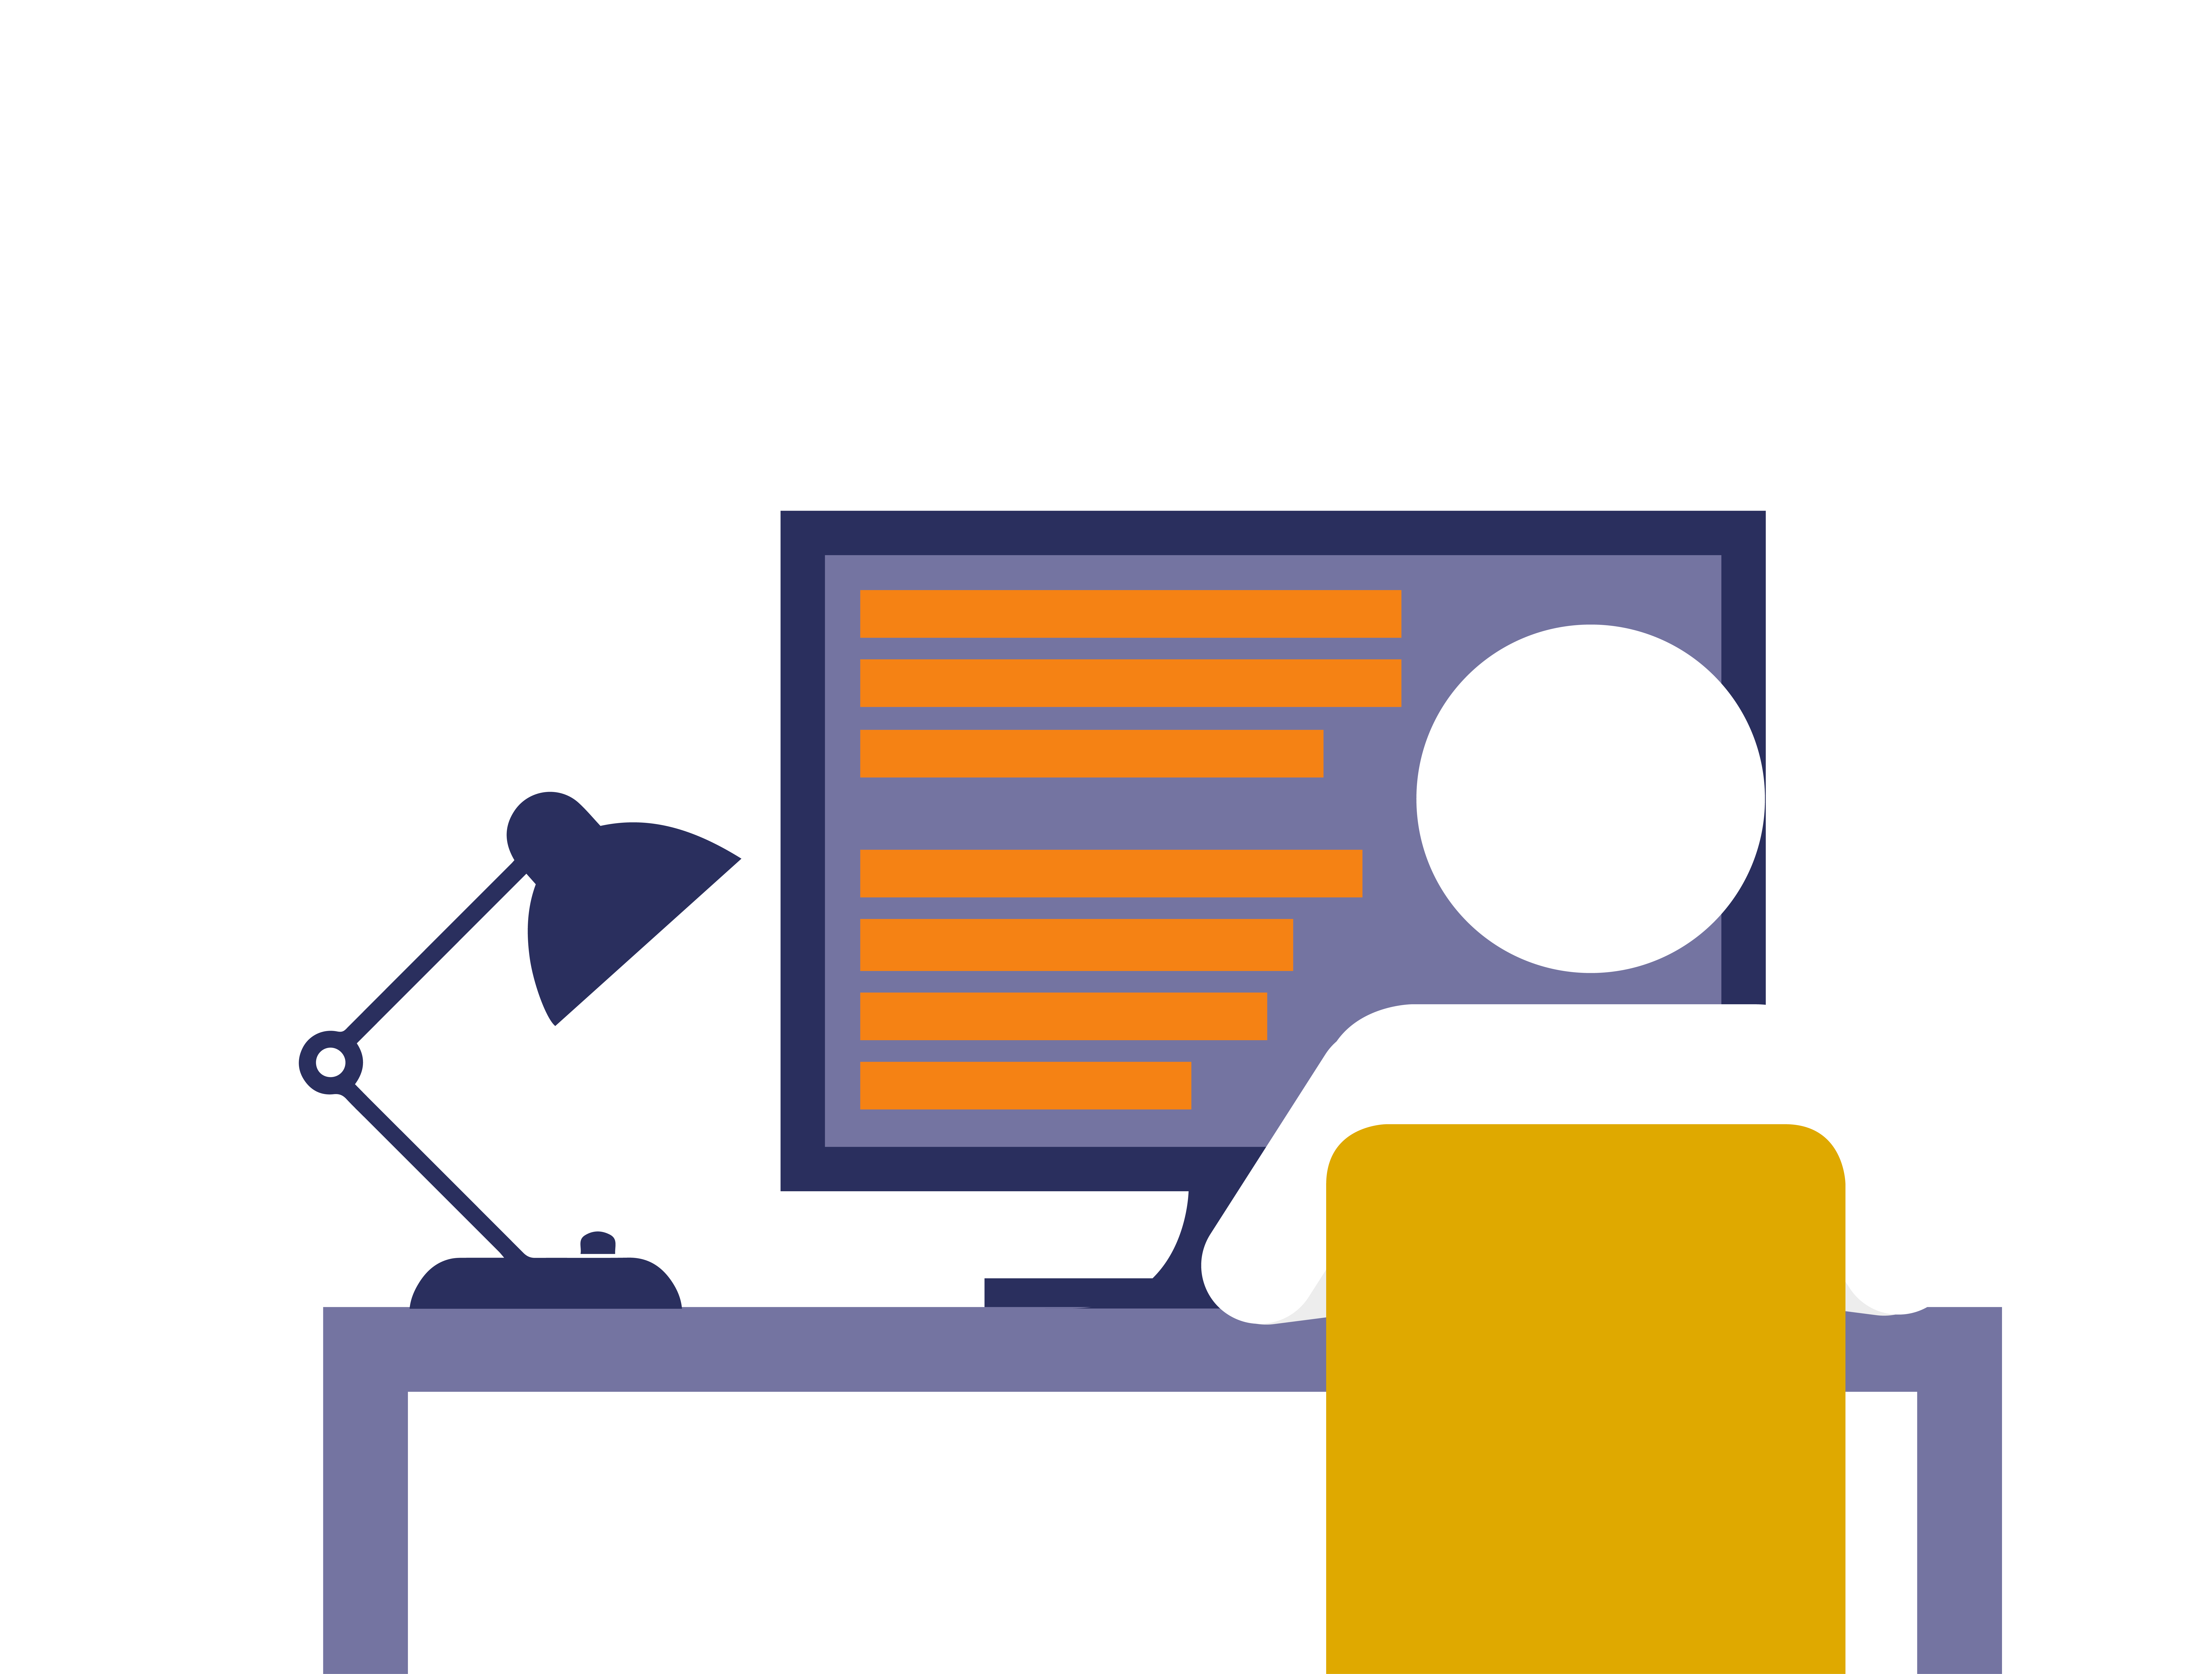 Graphic design of person sitting at a desktop computer with open access icon in corner